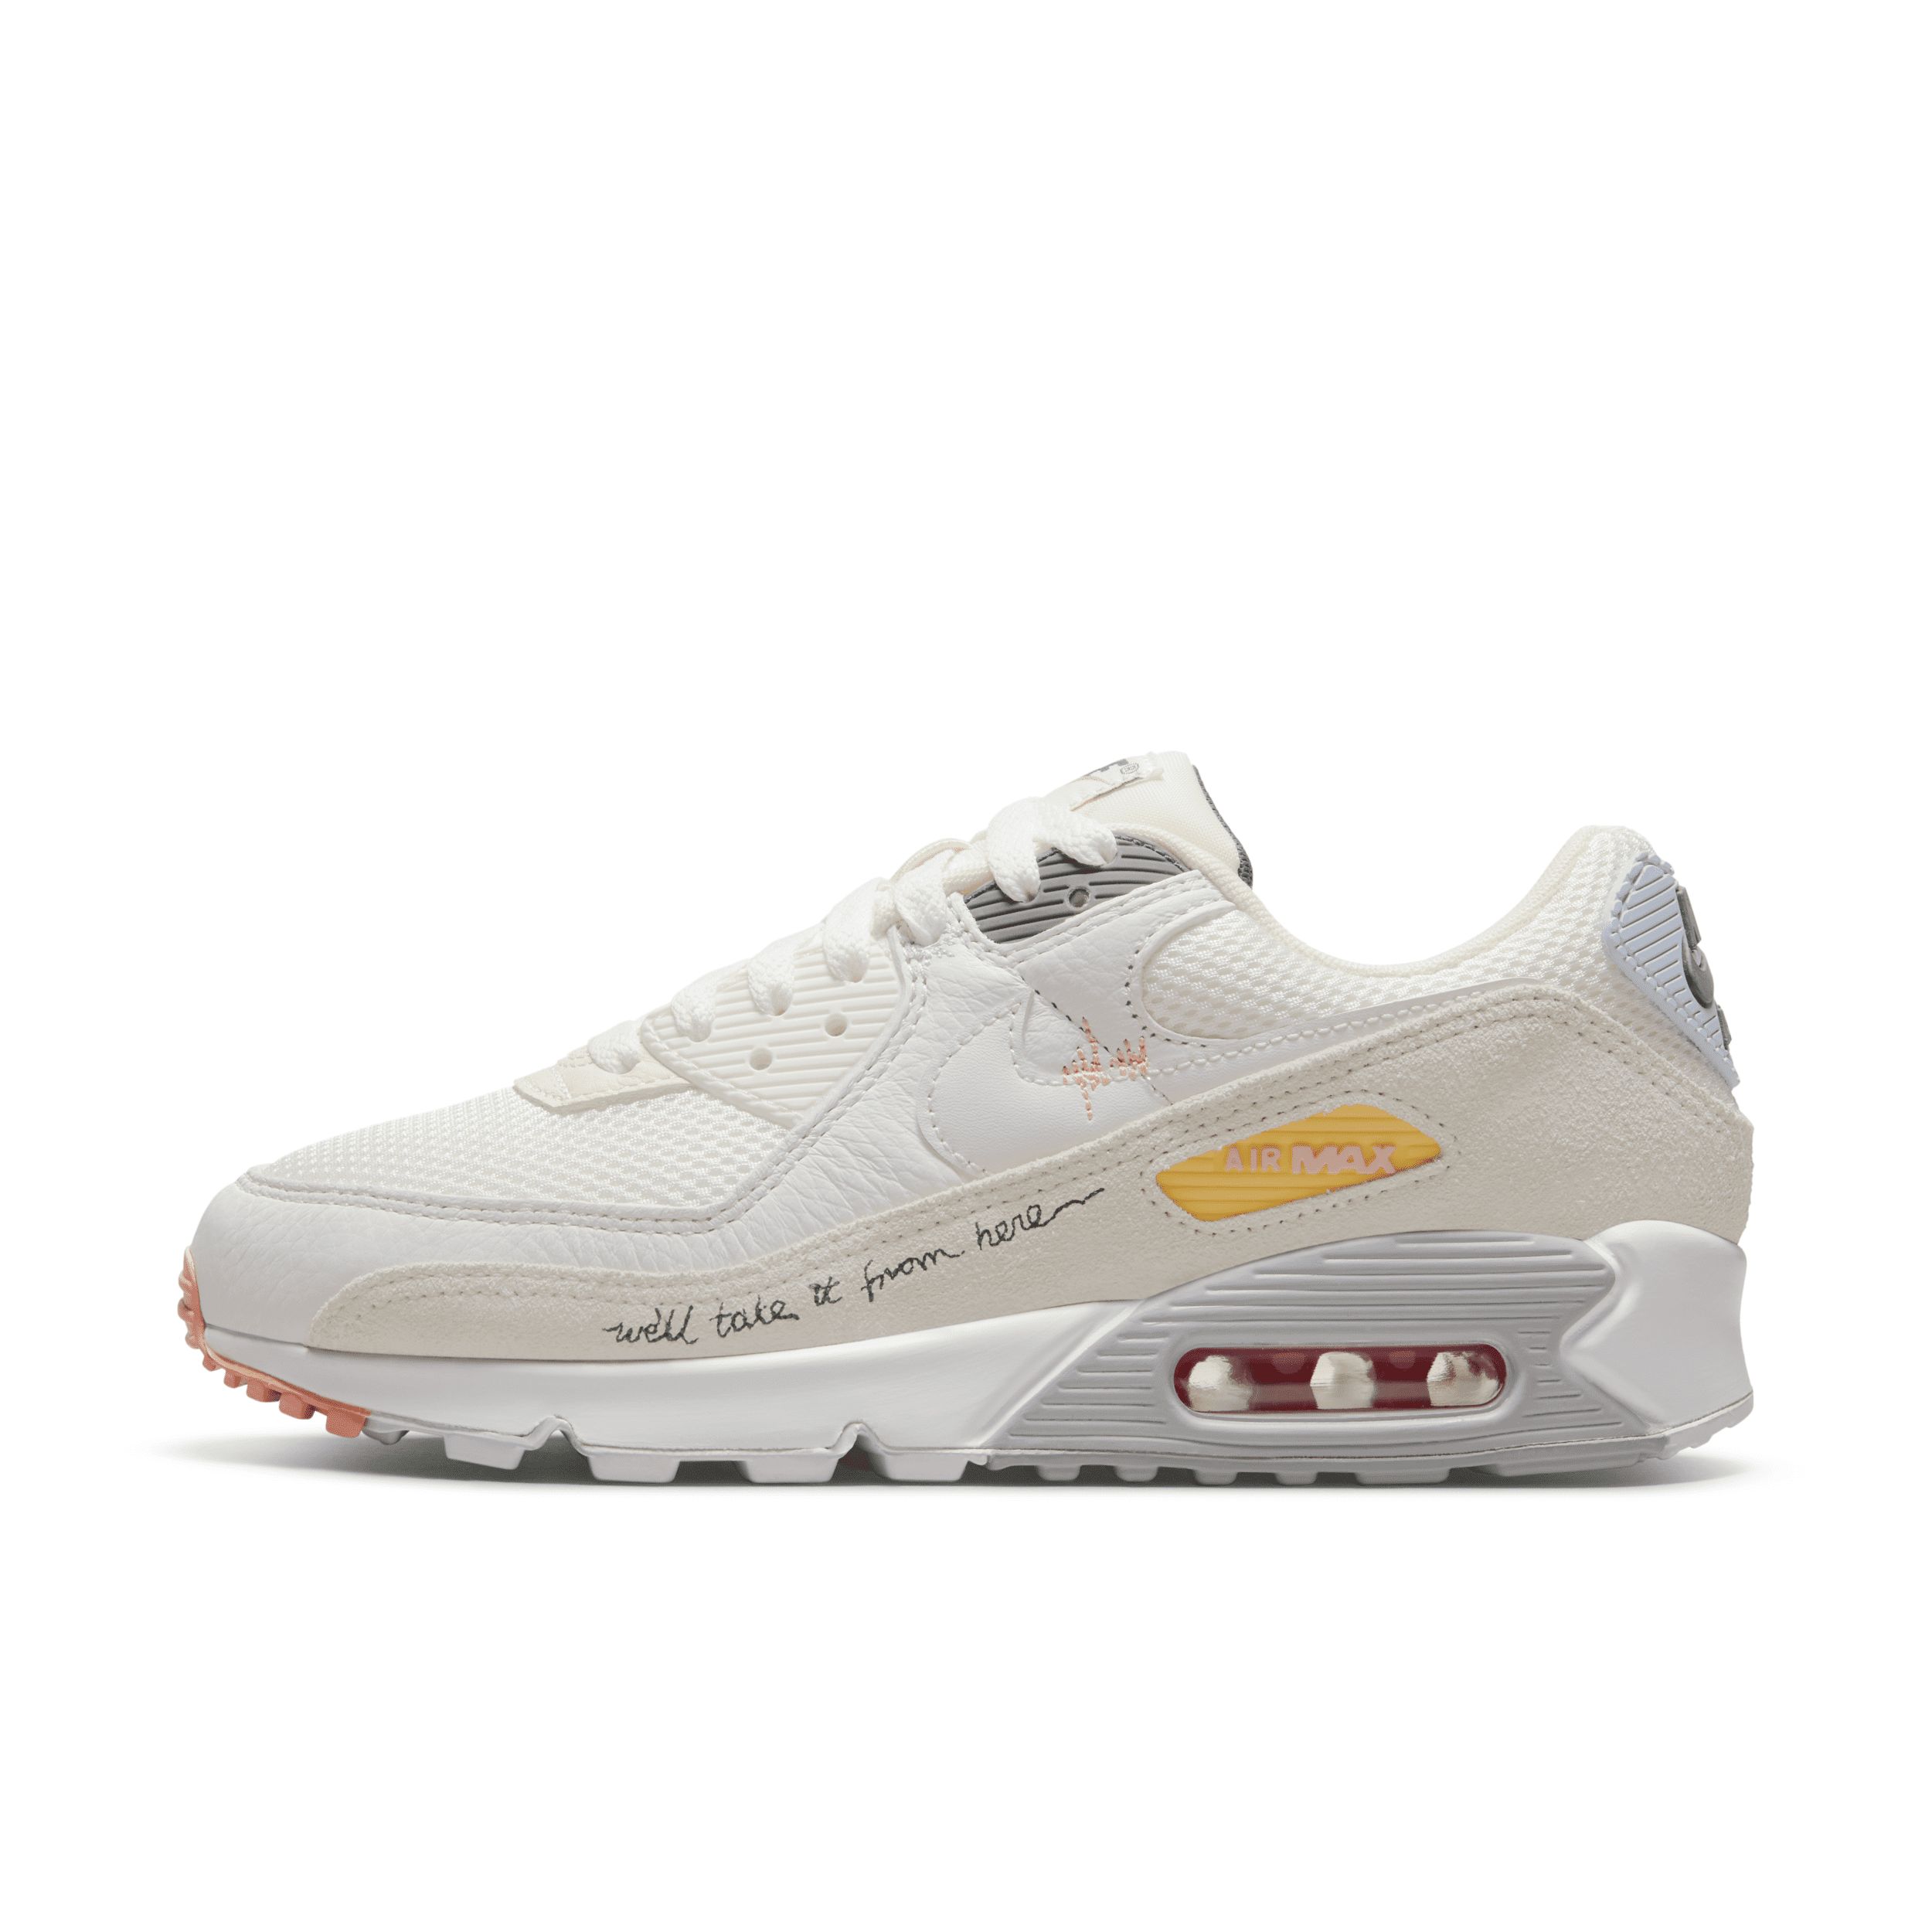 Nike Women's Air Max 90 Shoes in White, Size: 11 | DV2188-100 | Nike (US)